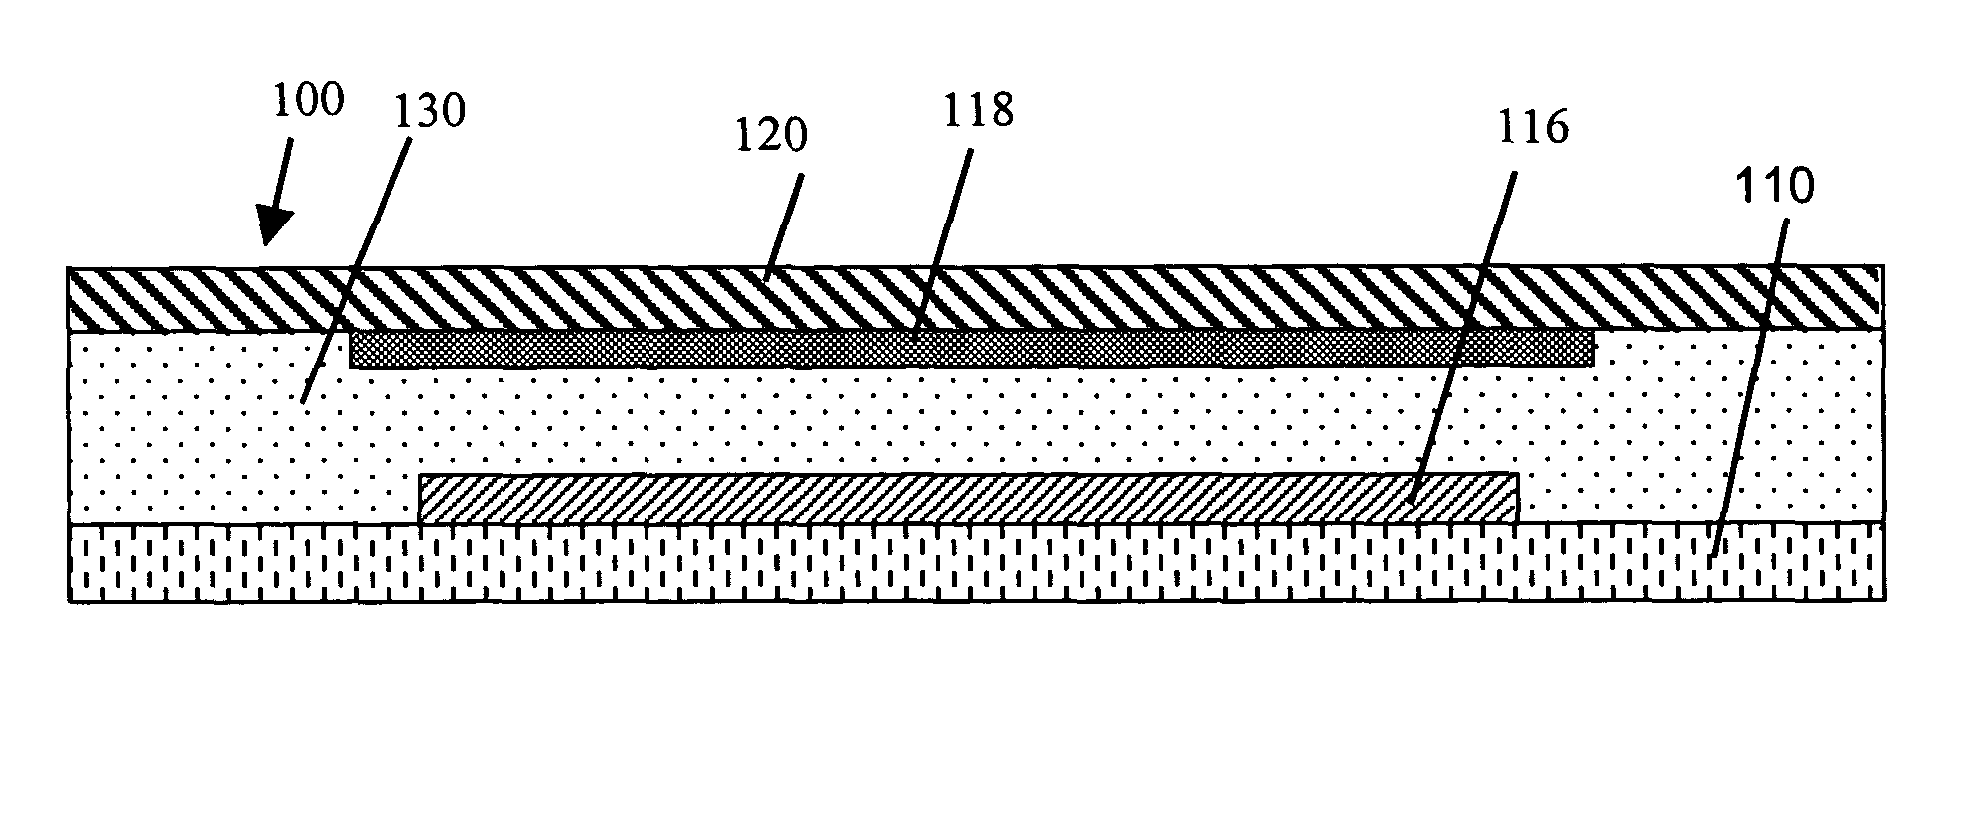 Protected organic electronic device structures incorporating pressure sensitive adhesive and desiccant